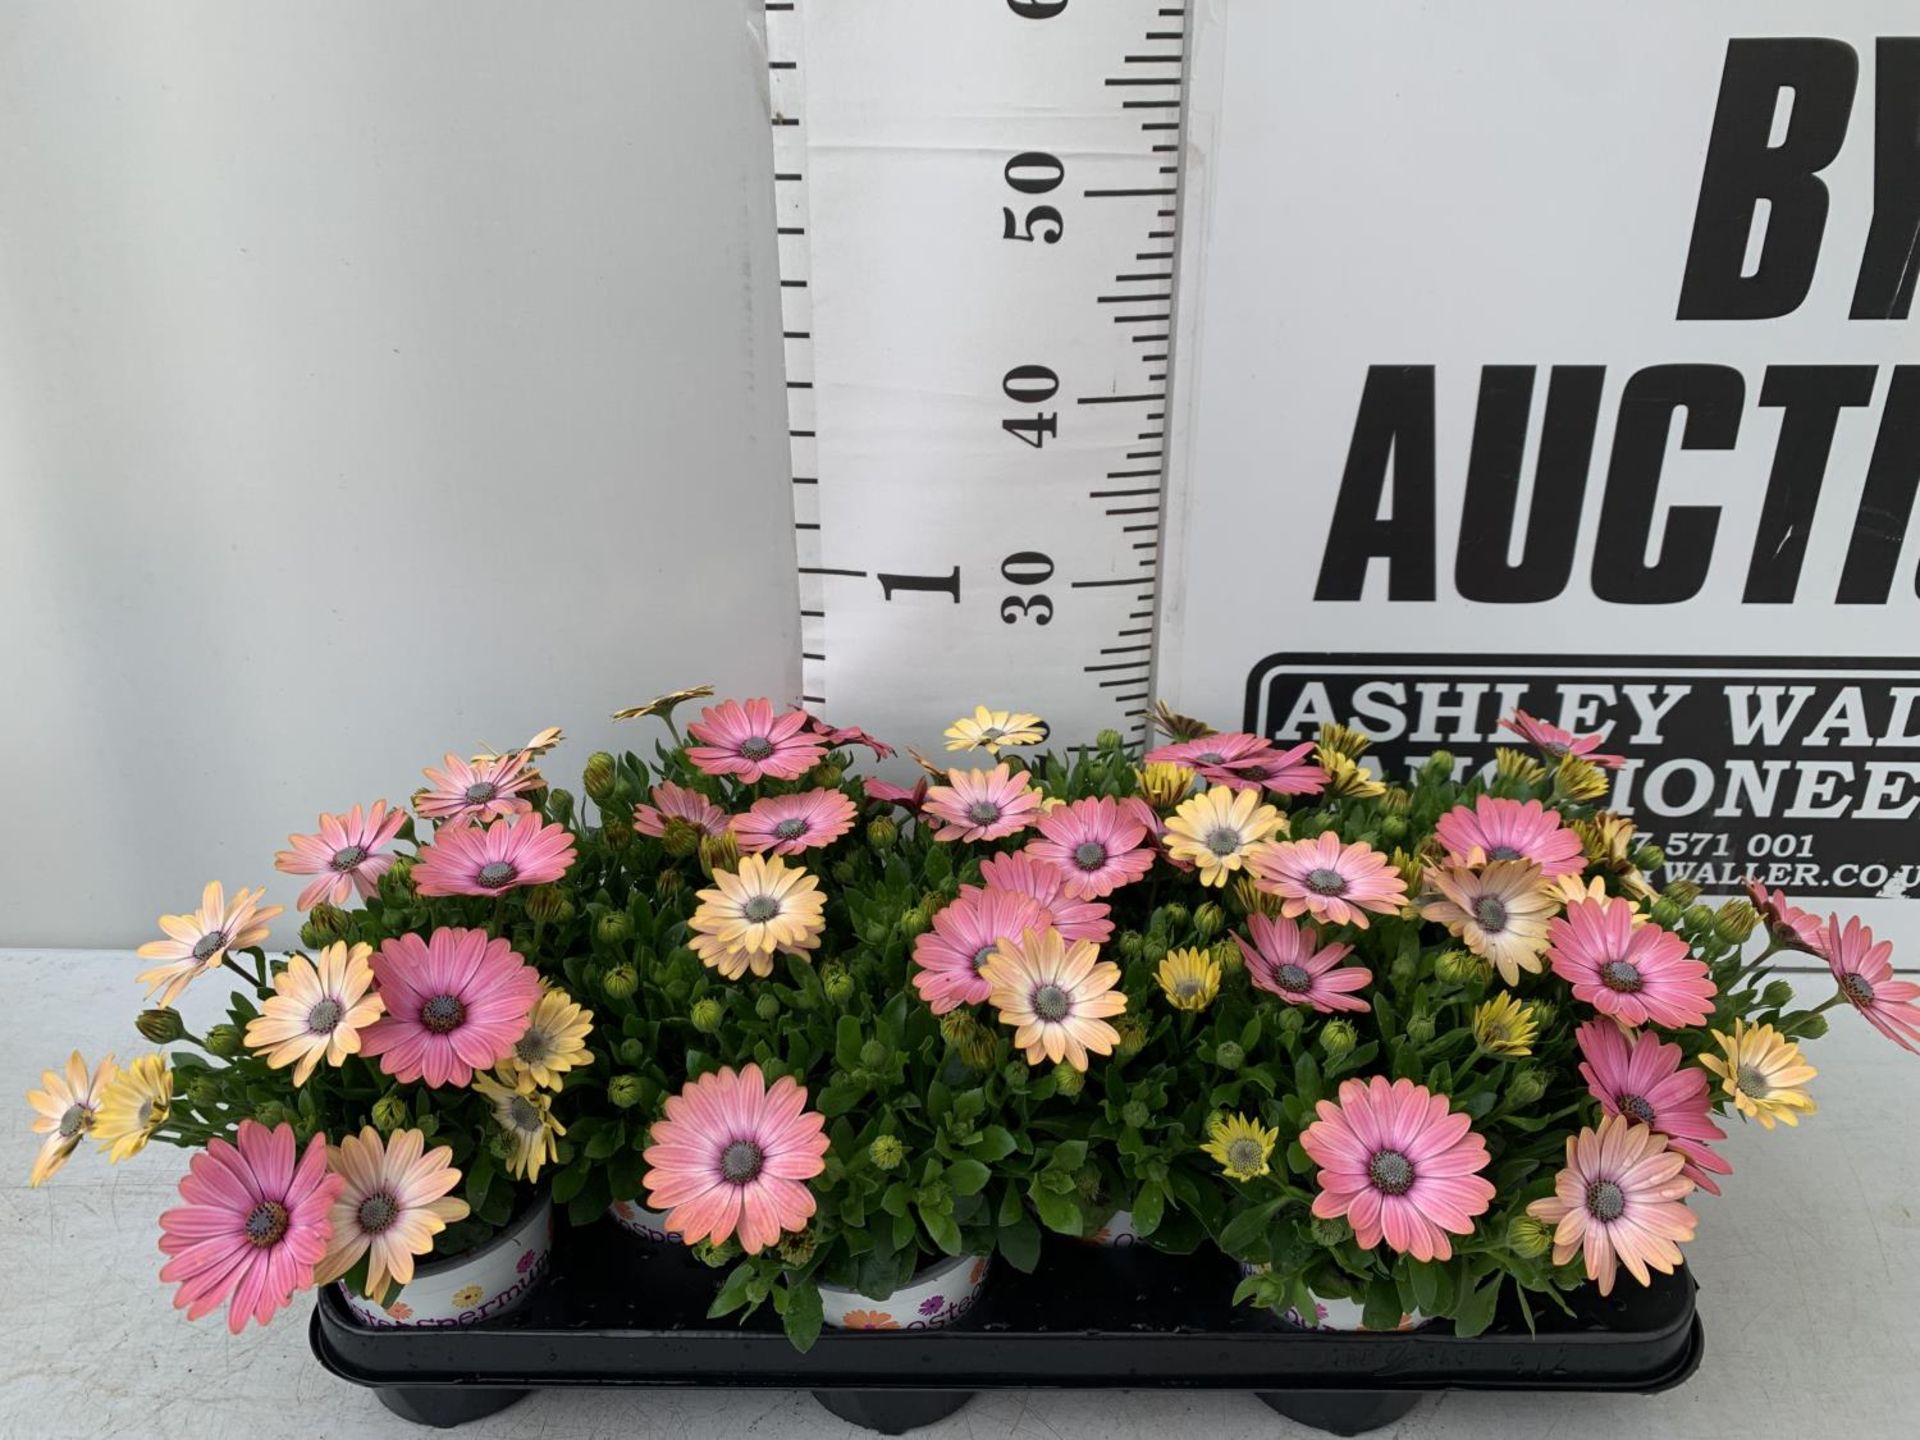 TWELVE MIXED COLOURED OSTEOSPERMUM PLANTS ON A TRAY TO BE SOLD FOR THE TWELVE PLUS VAT